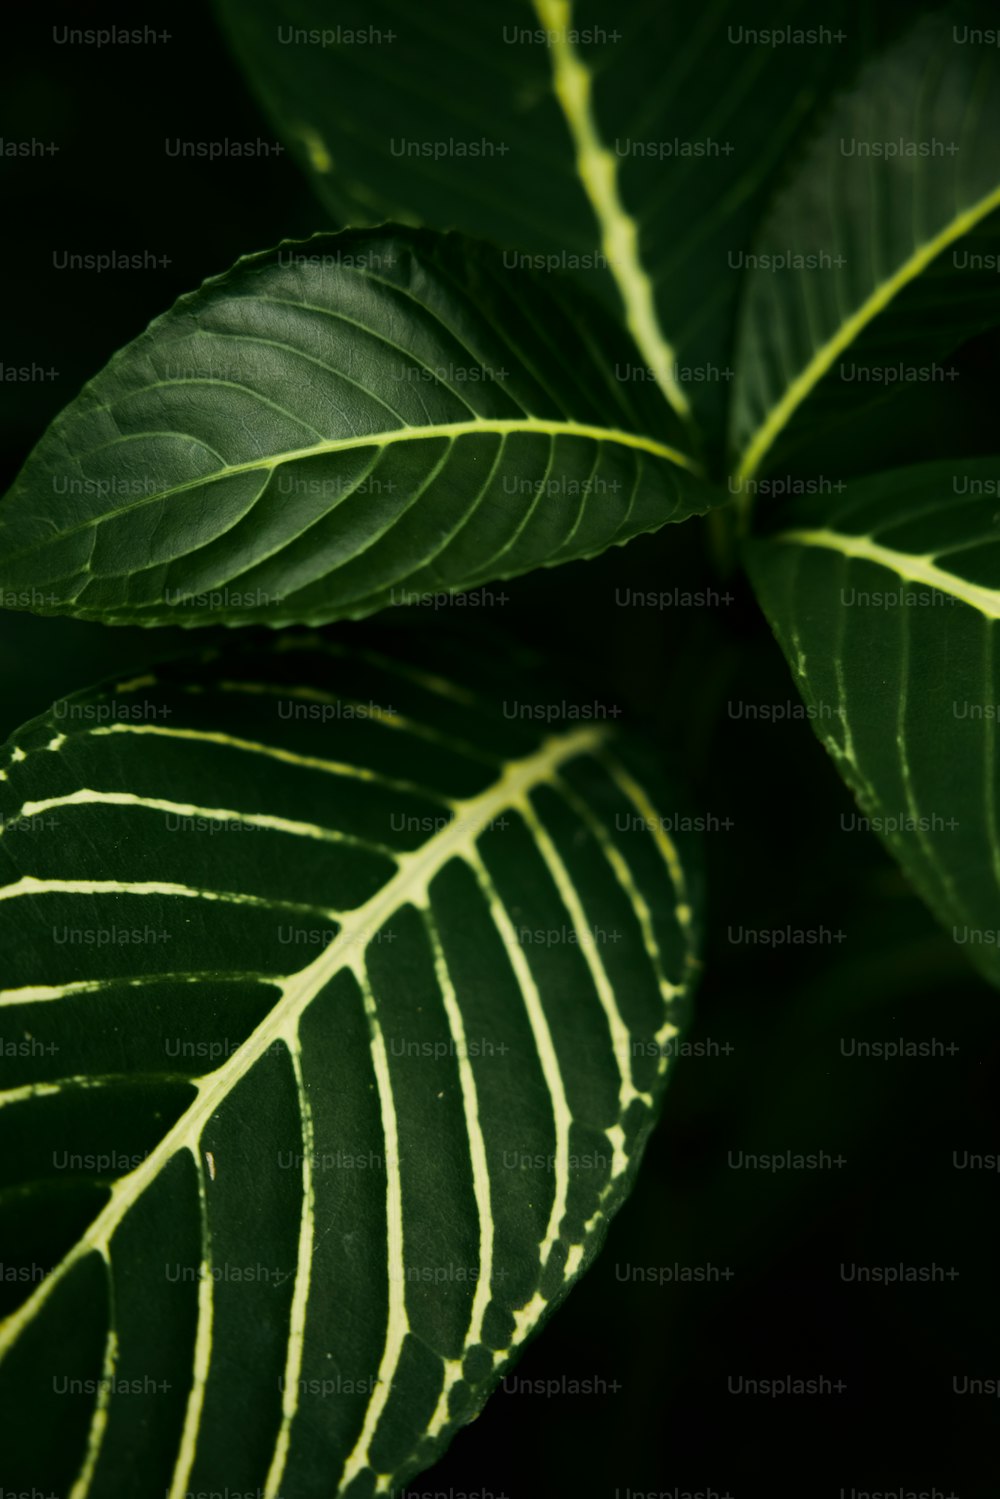 a close up of a green leaf on a plant